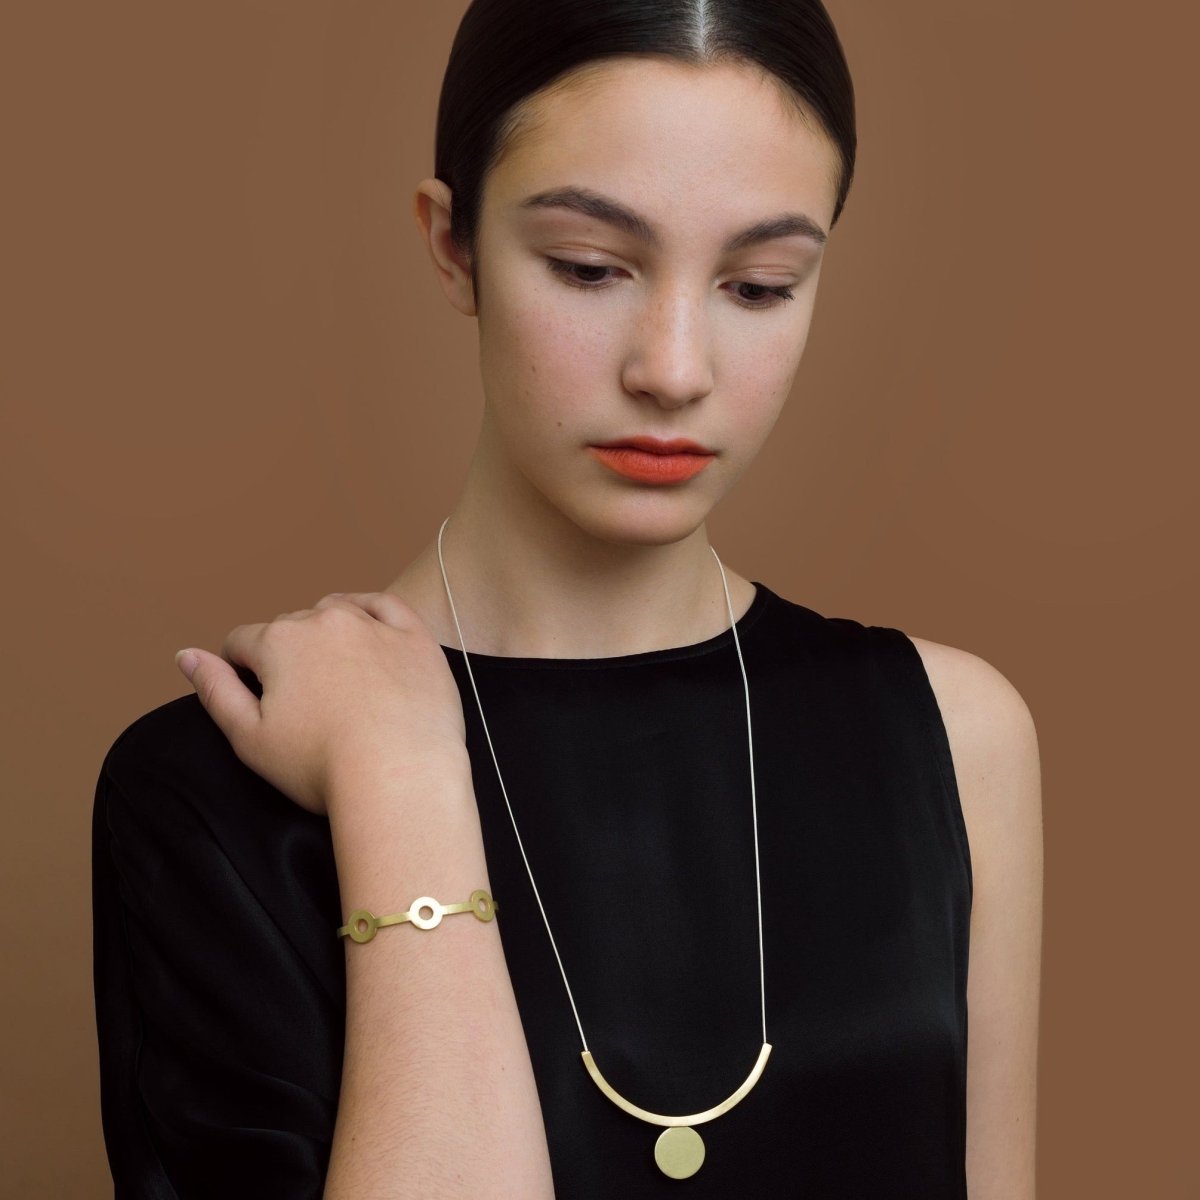 A silver chain necklace with a rounded brass and circle bar focal piece. The Floating Necklace is designed and handcrafted by Natalie Joy in Portland, Oregon.